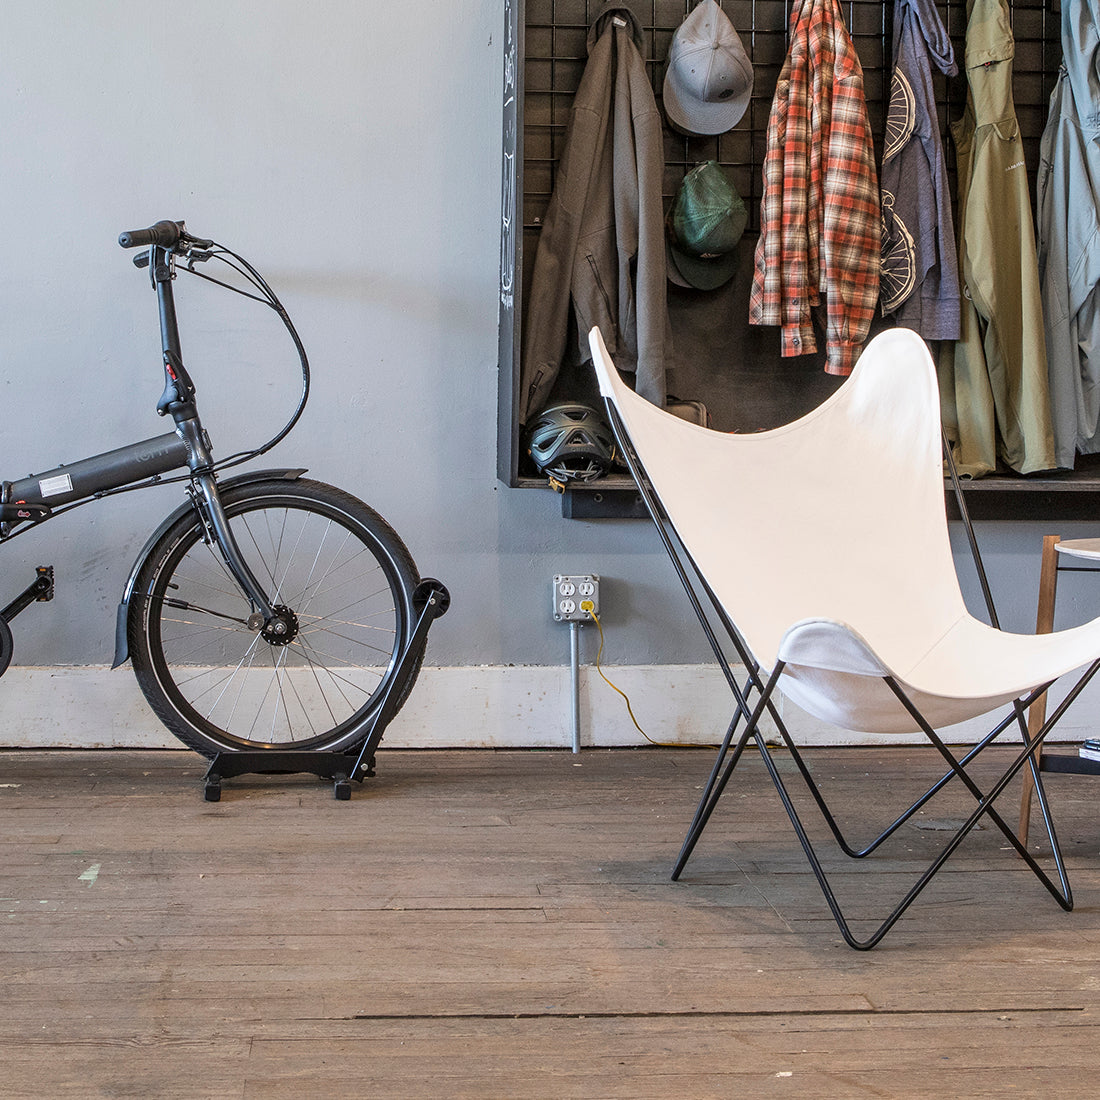 Small apartment with chair and coat rack with bike in free standing storage system.